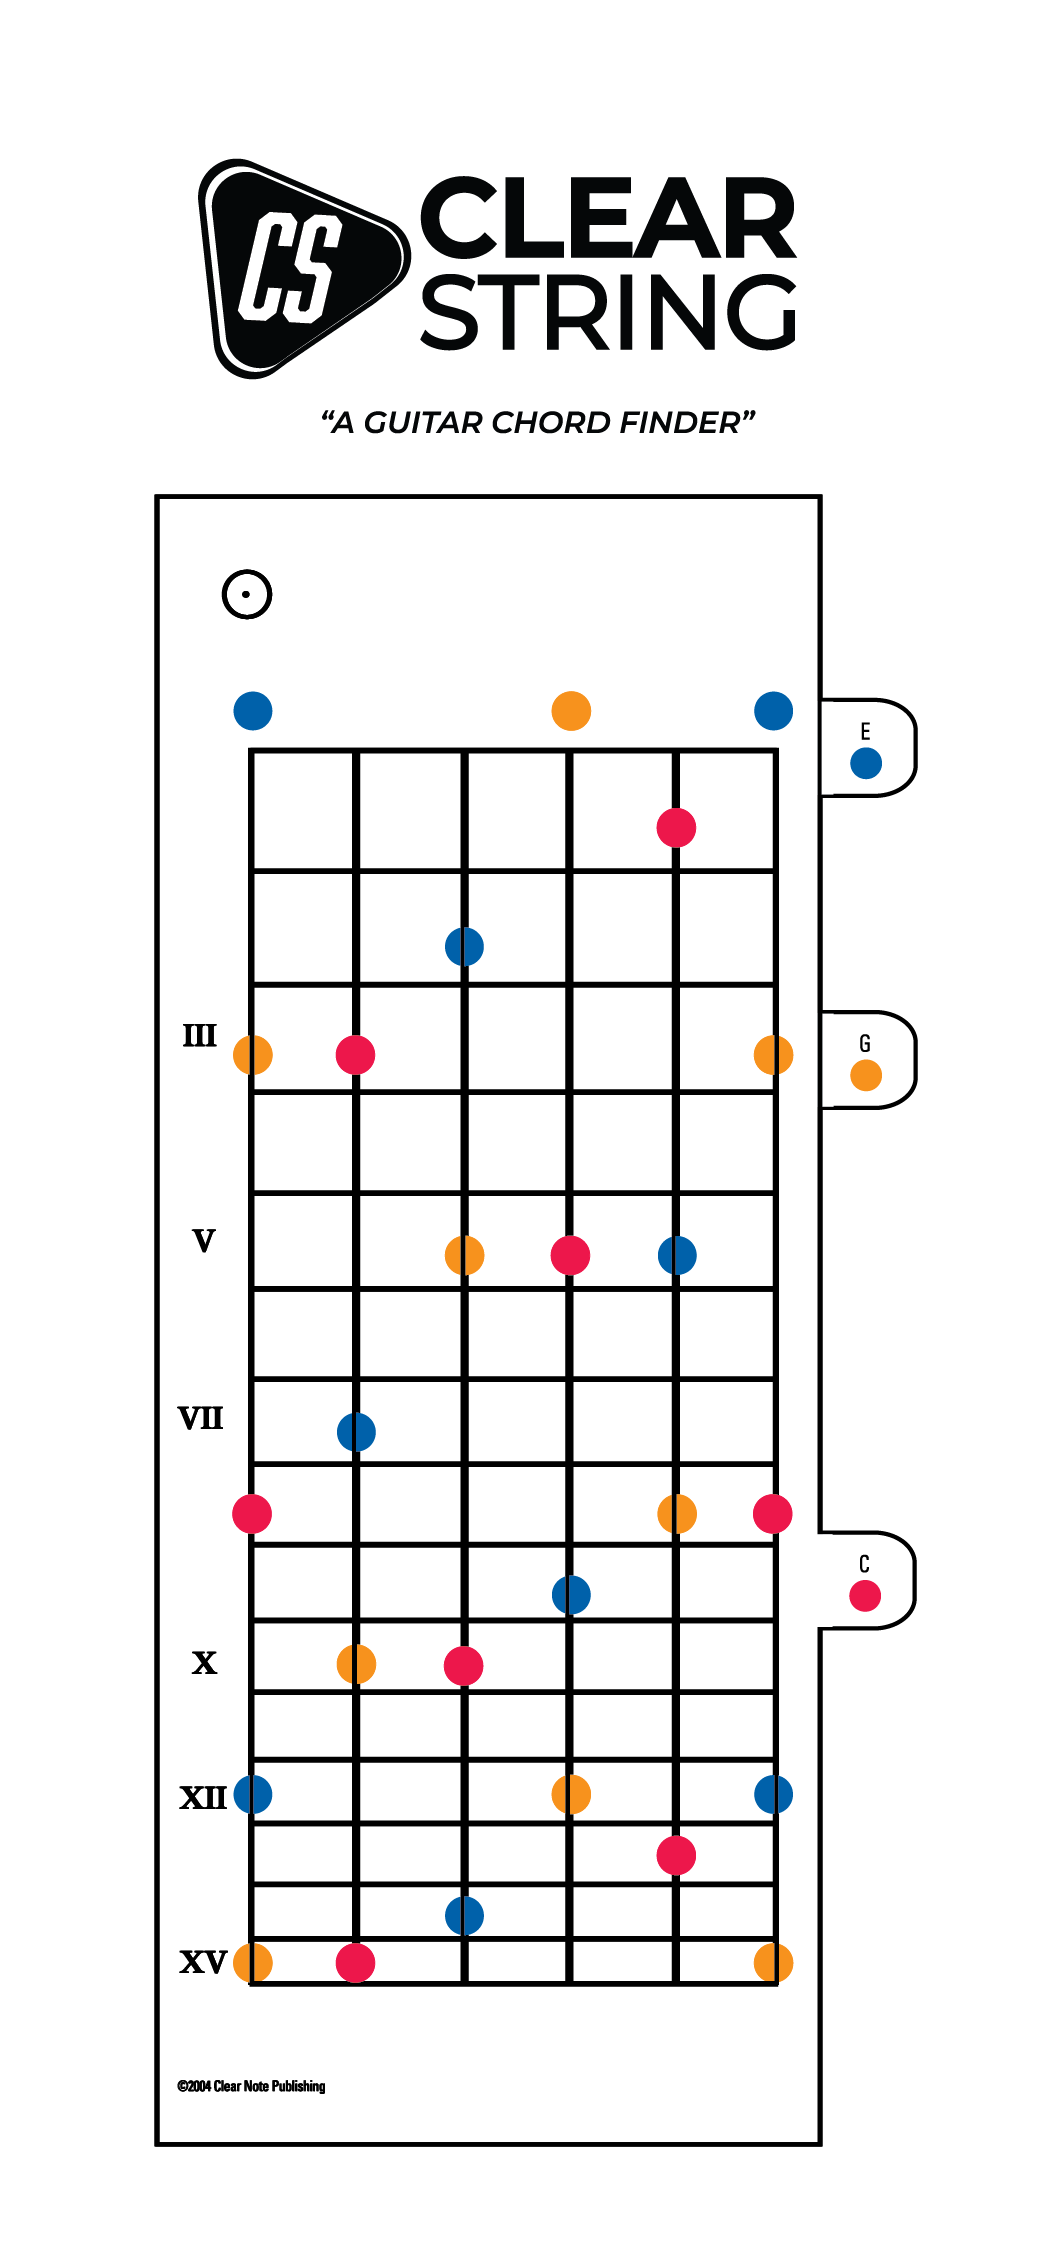 ClearString Guitar Chord Finder – ClearString Publishing